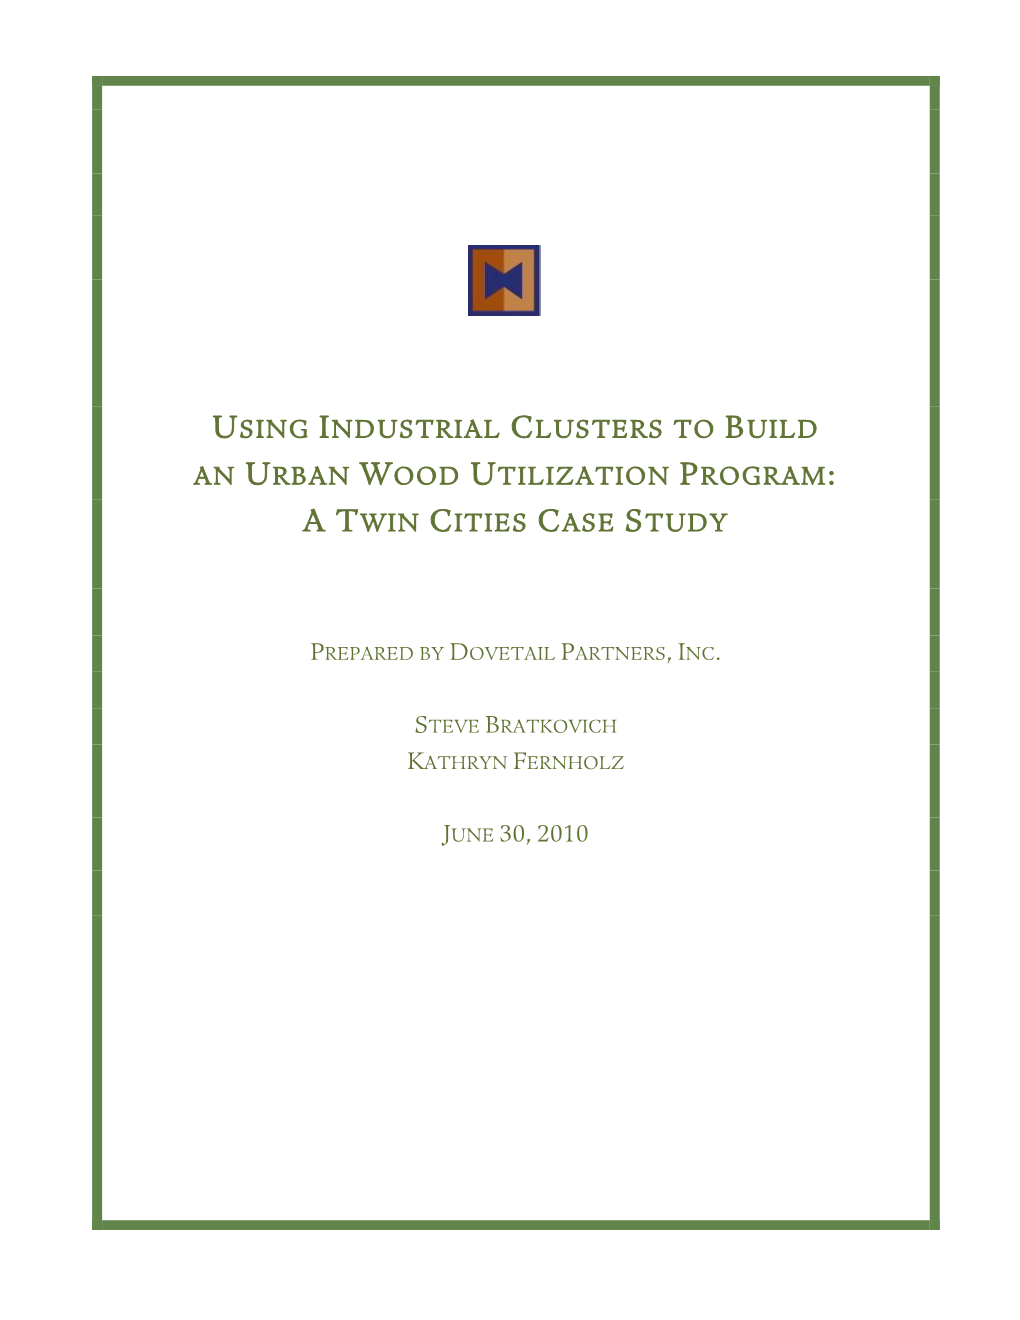 Using Industrial Clusters to Build an Urban Wood Utilization Program: a Twin Cities Case Study